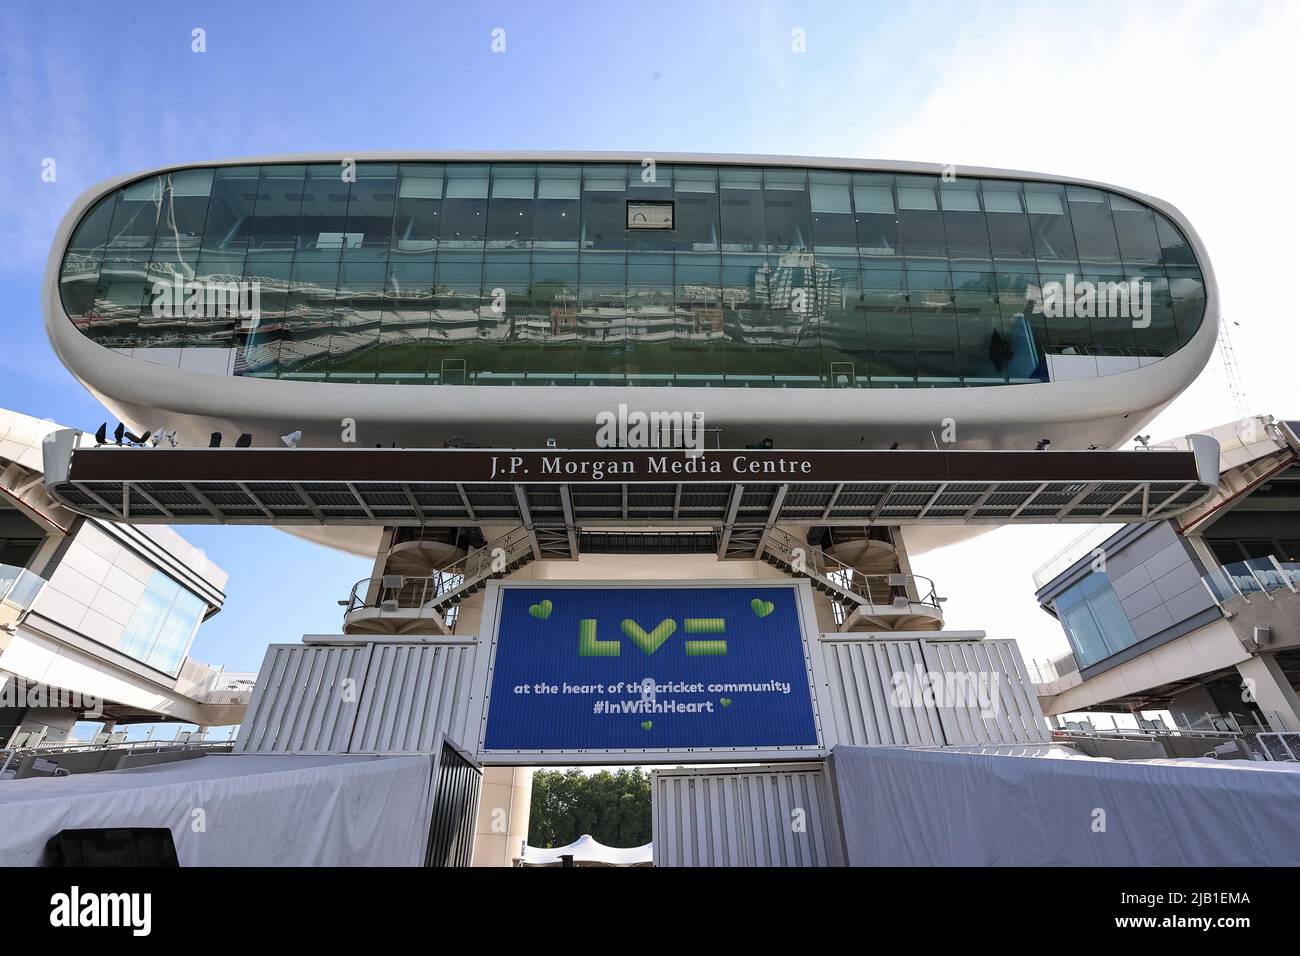 London, UK. 02nd June, 2022. The J.P Morgan Media Centre at Lords Credit: News Images /Alamy Live News Stock Photo